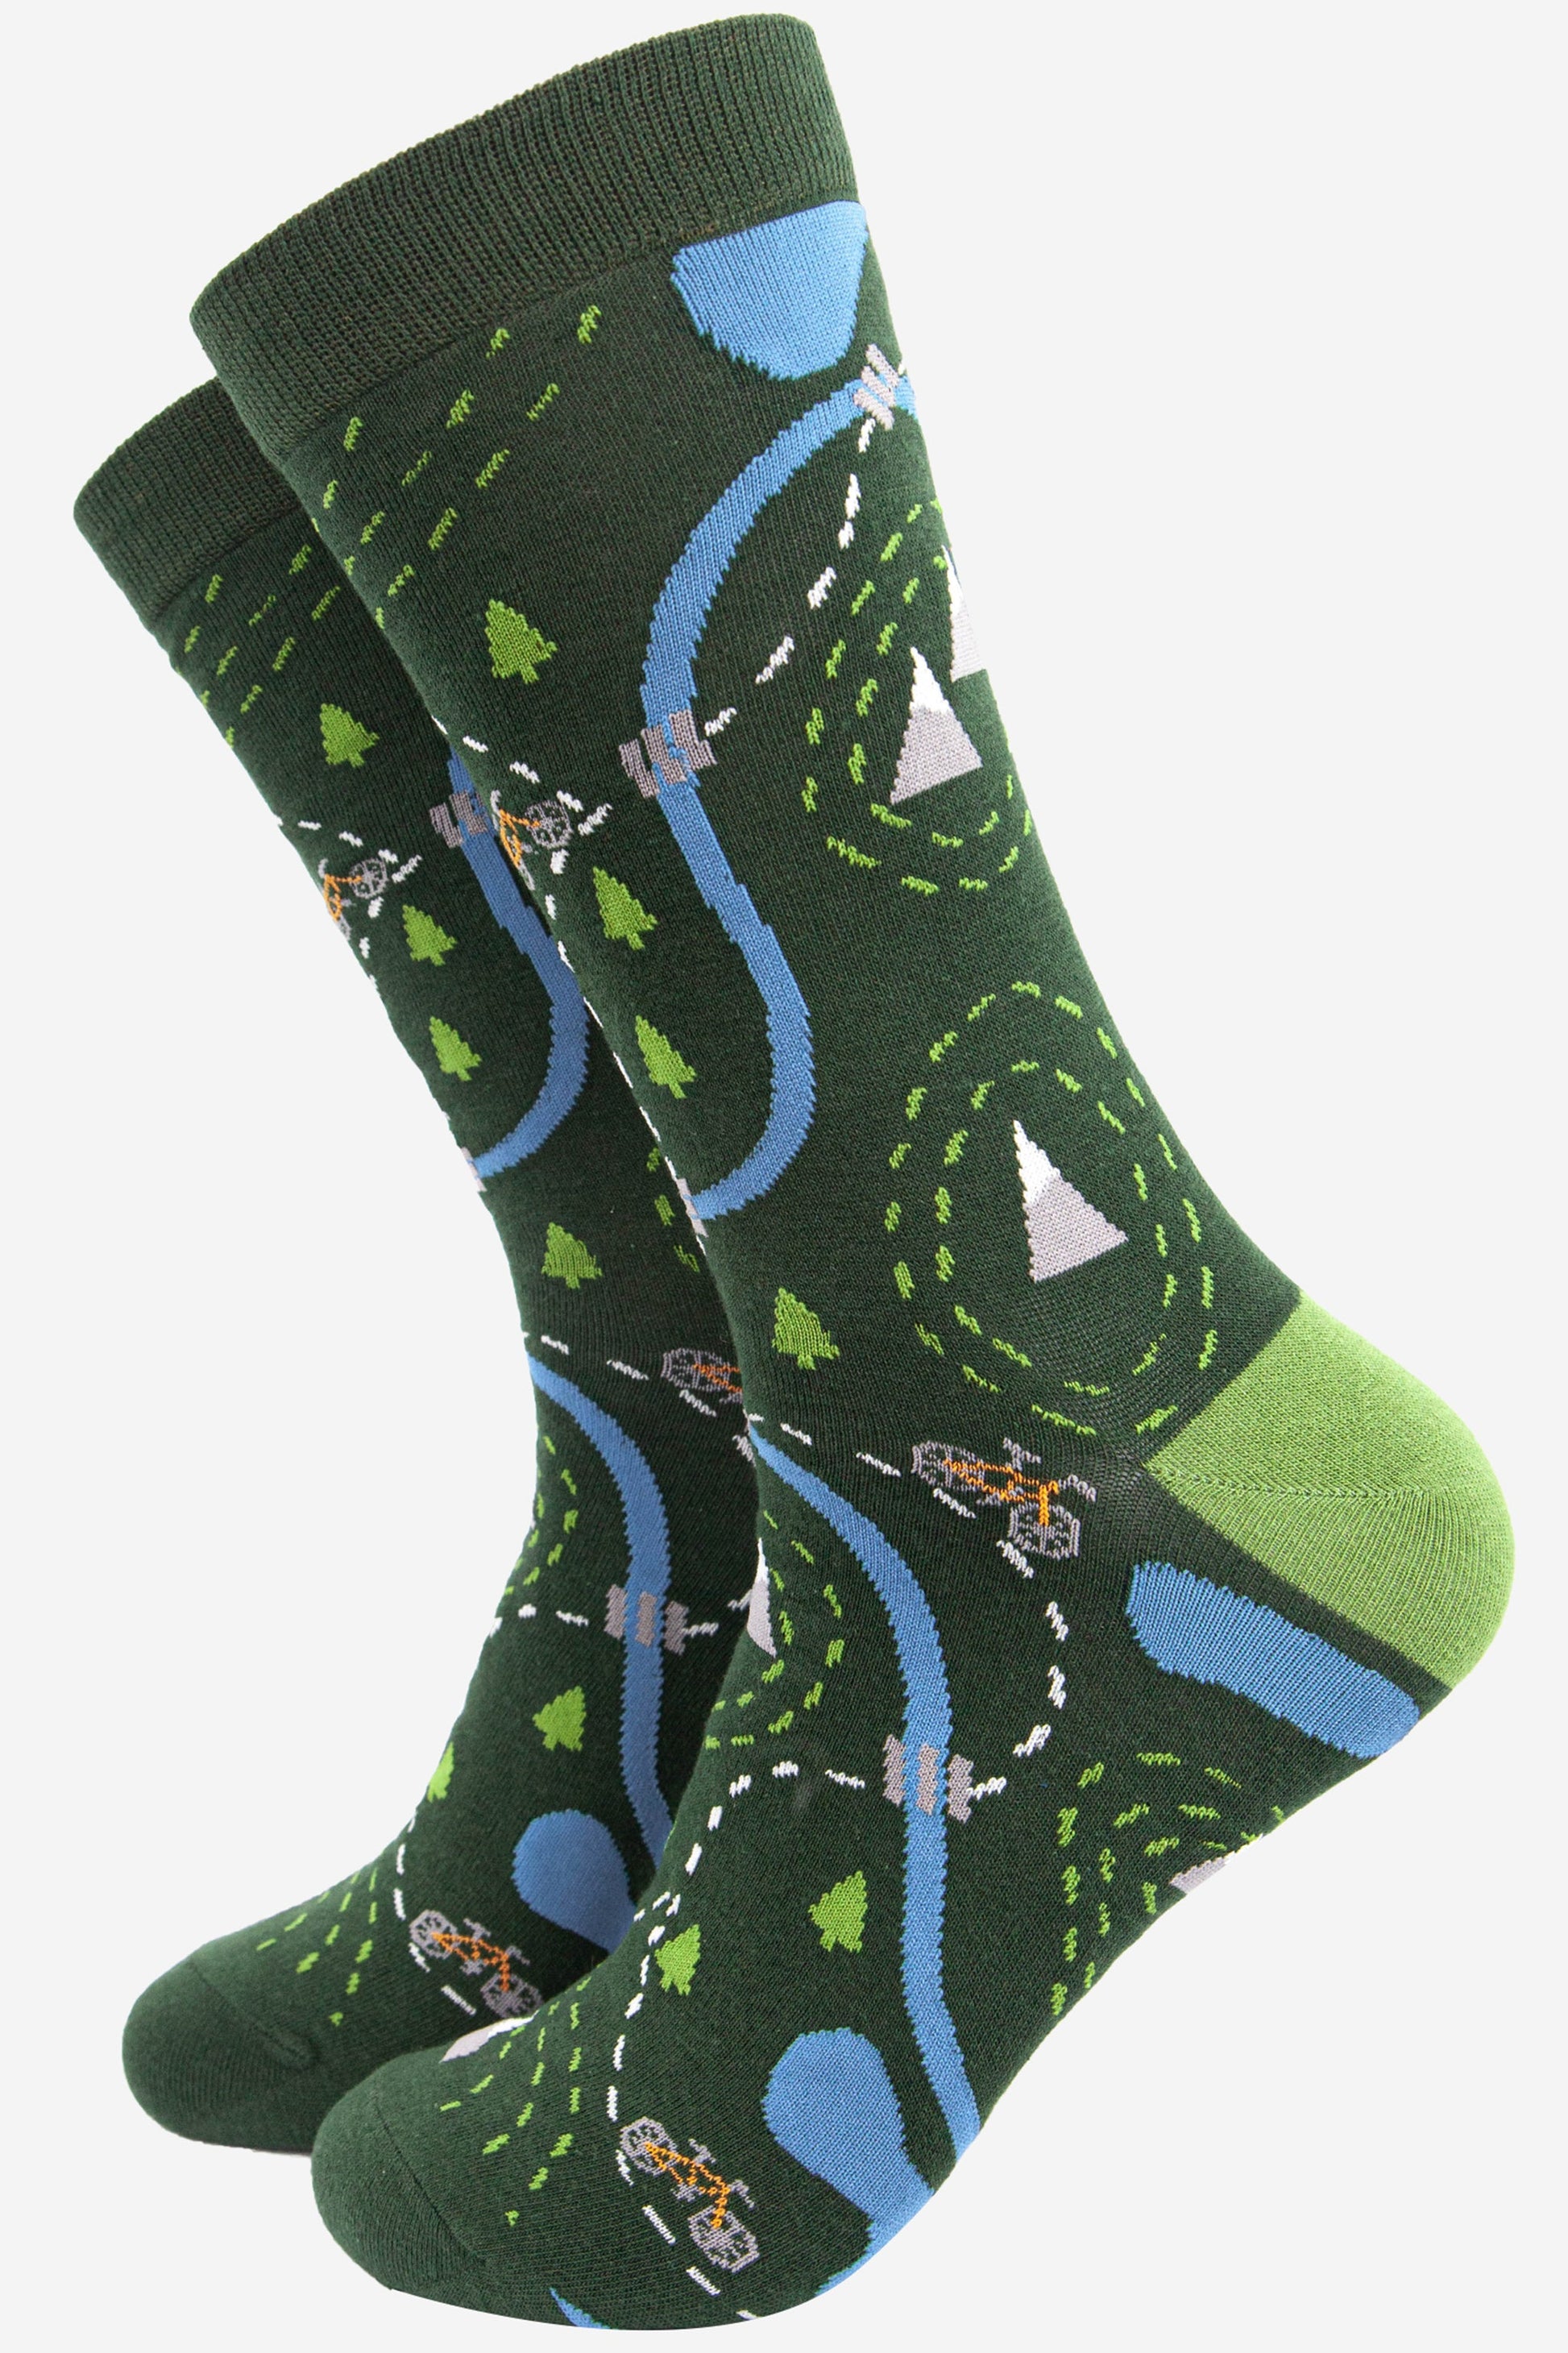 green bamboo socks designed to look like a biking trail map with paths, trees and heels